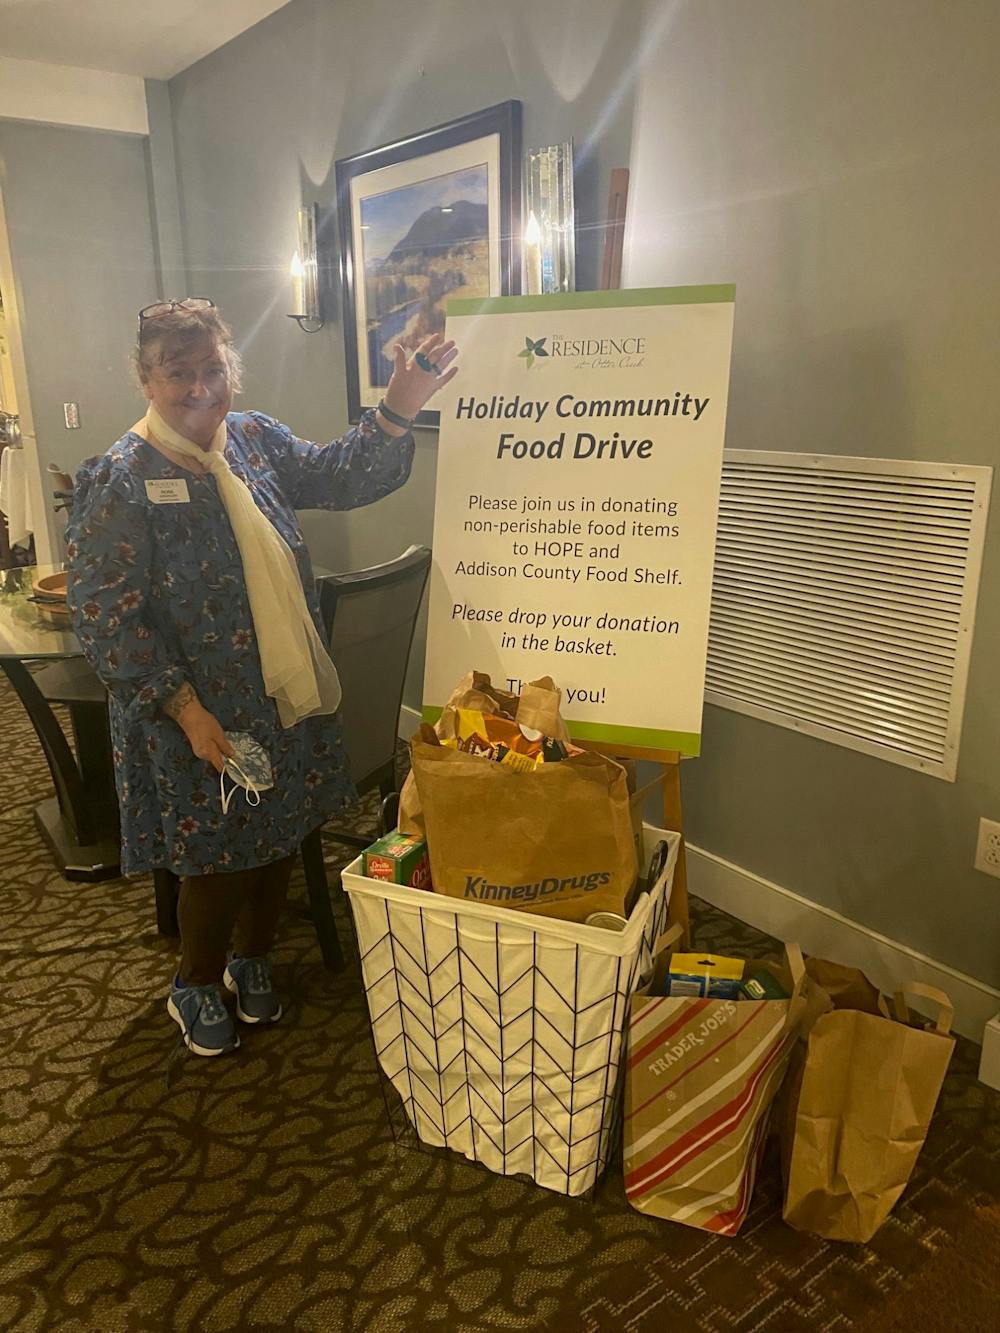 The food drive basket was already overflowing as of Oct. 31. Seen here with Rose Chevalier, the receptionist at The Residence. Photo courtesey of Tracy Van Hoven.